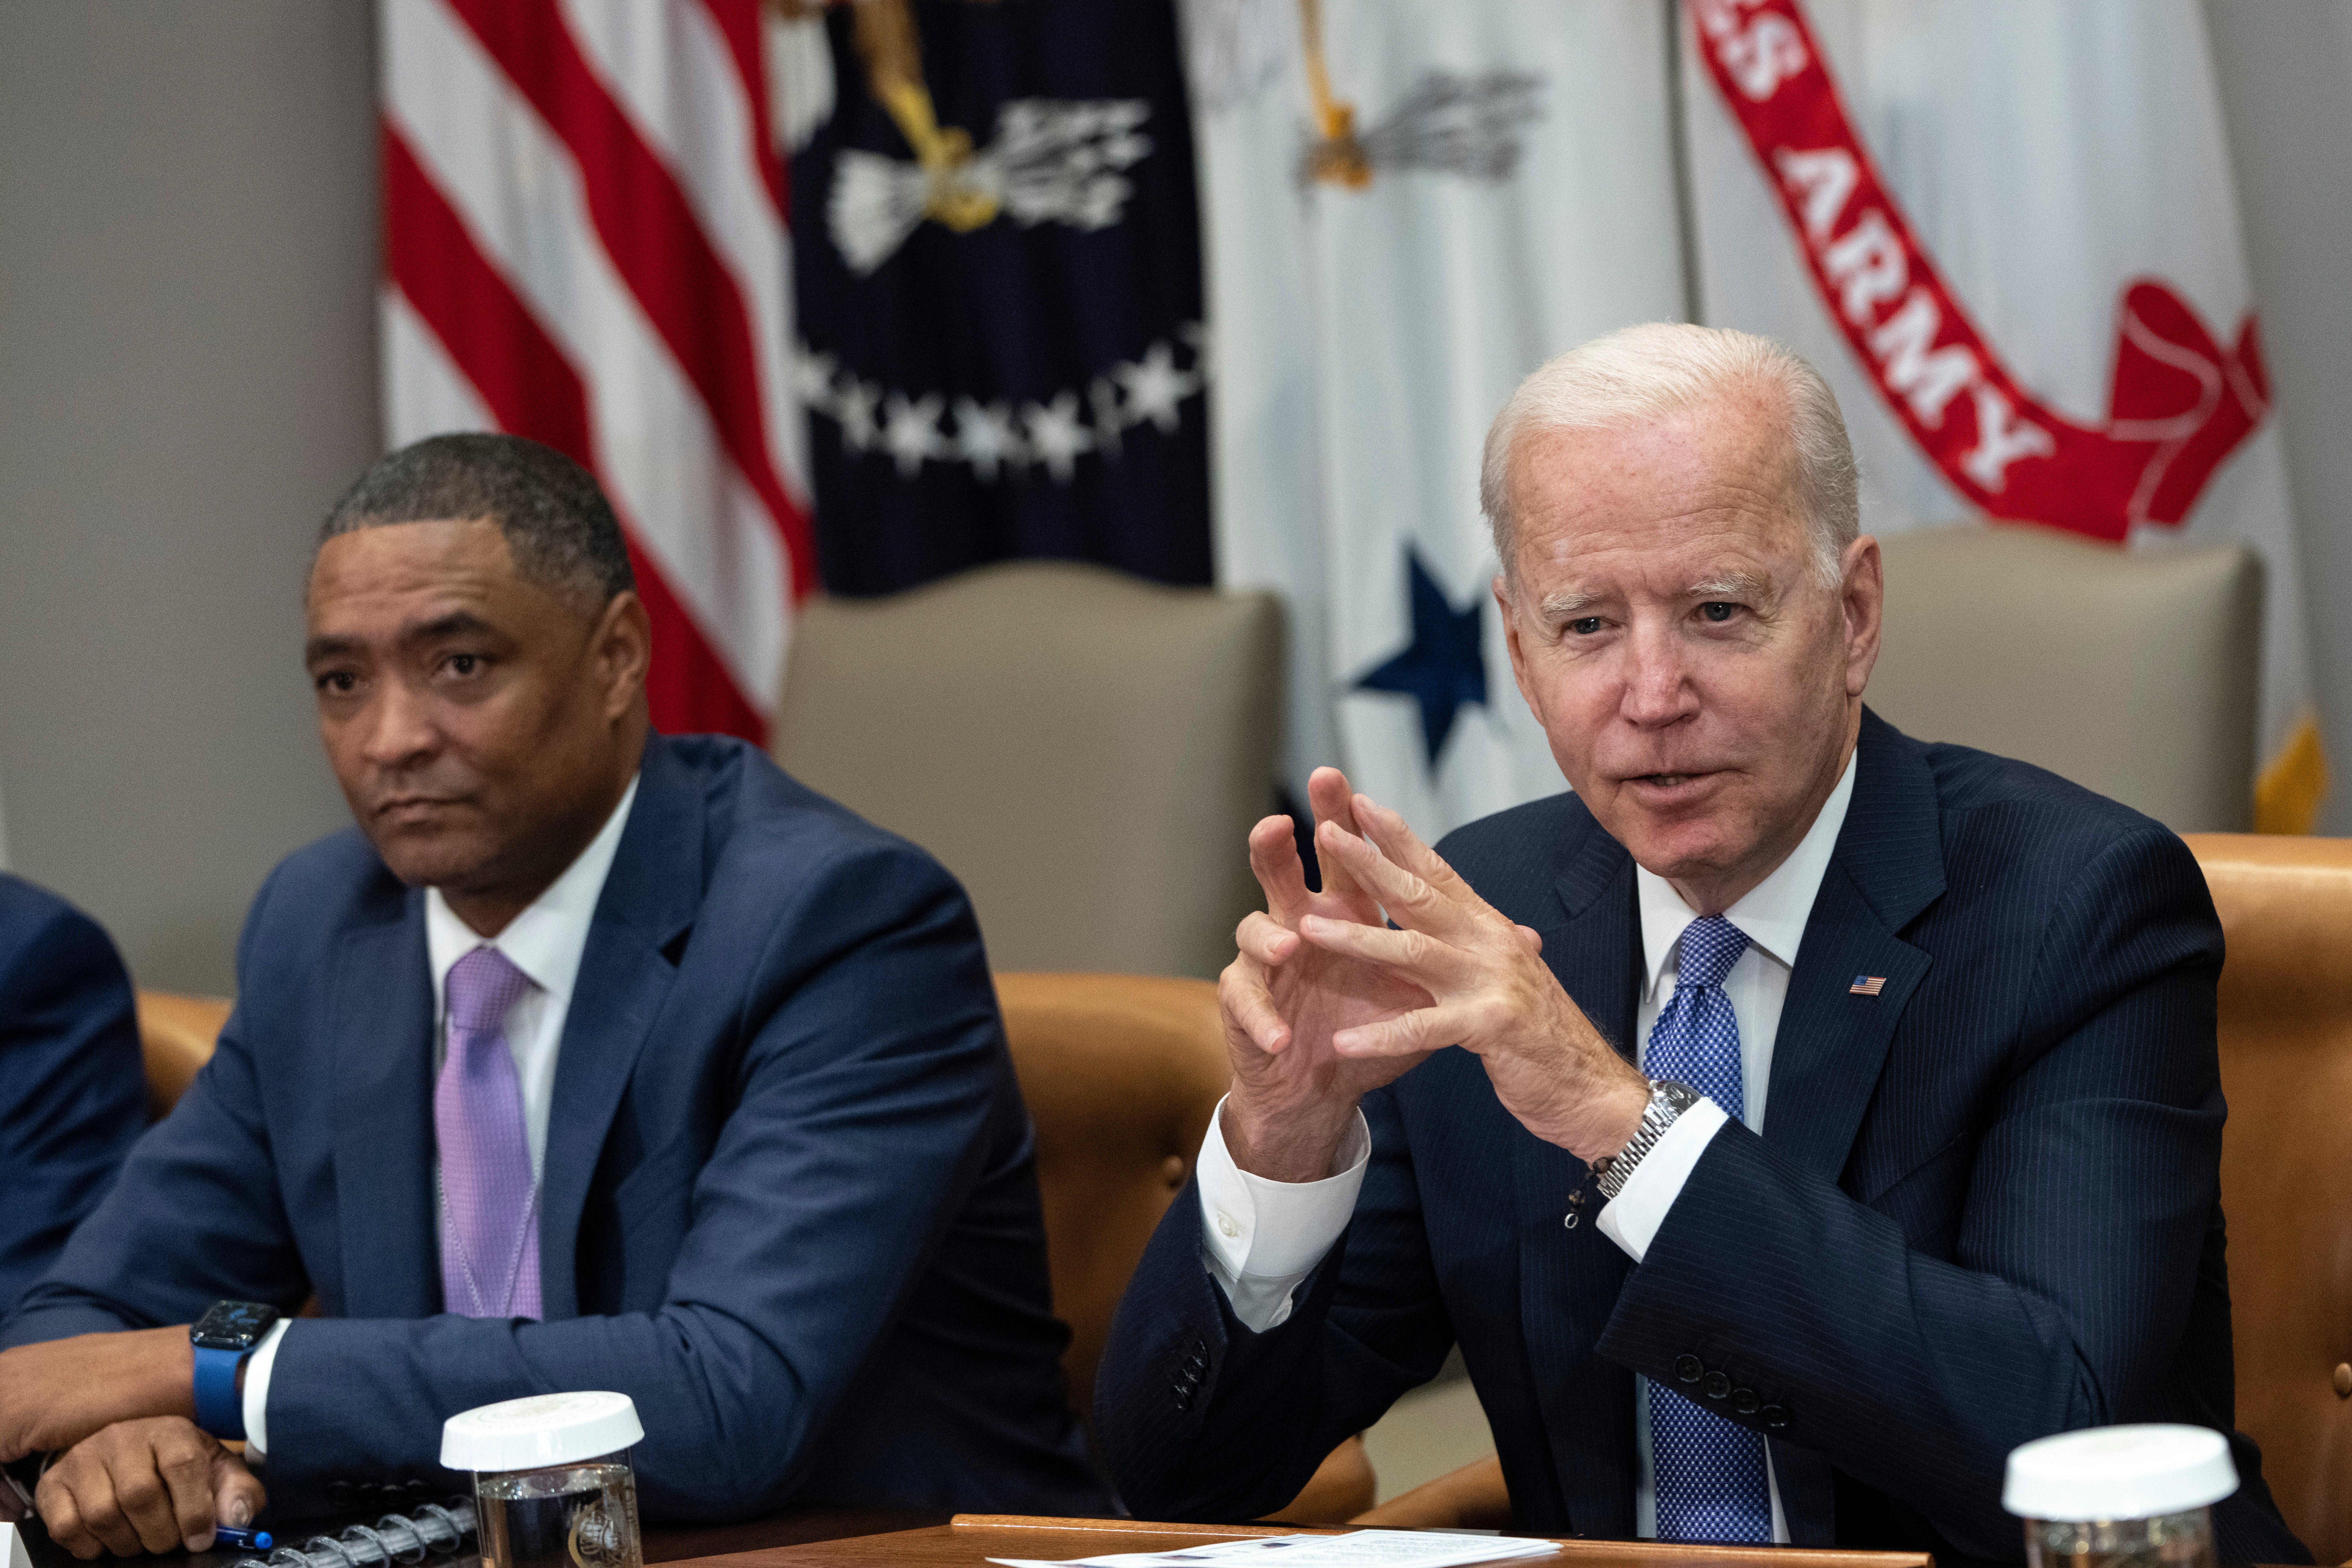 Cedric Richmond, senior advisor to the president and director of the White House Office of Public Engagement, looks on as U.S. President Joe Biden meets with advisors, union and business leaders about infrastructure in the Roosevelt Room of the White House on July 22, 2021 in Washington, DC.